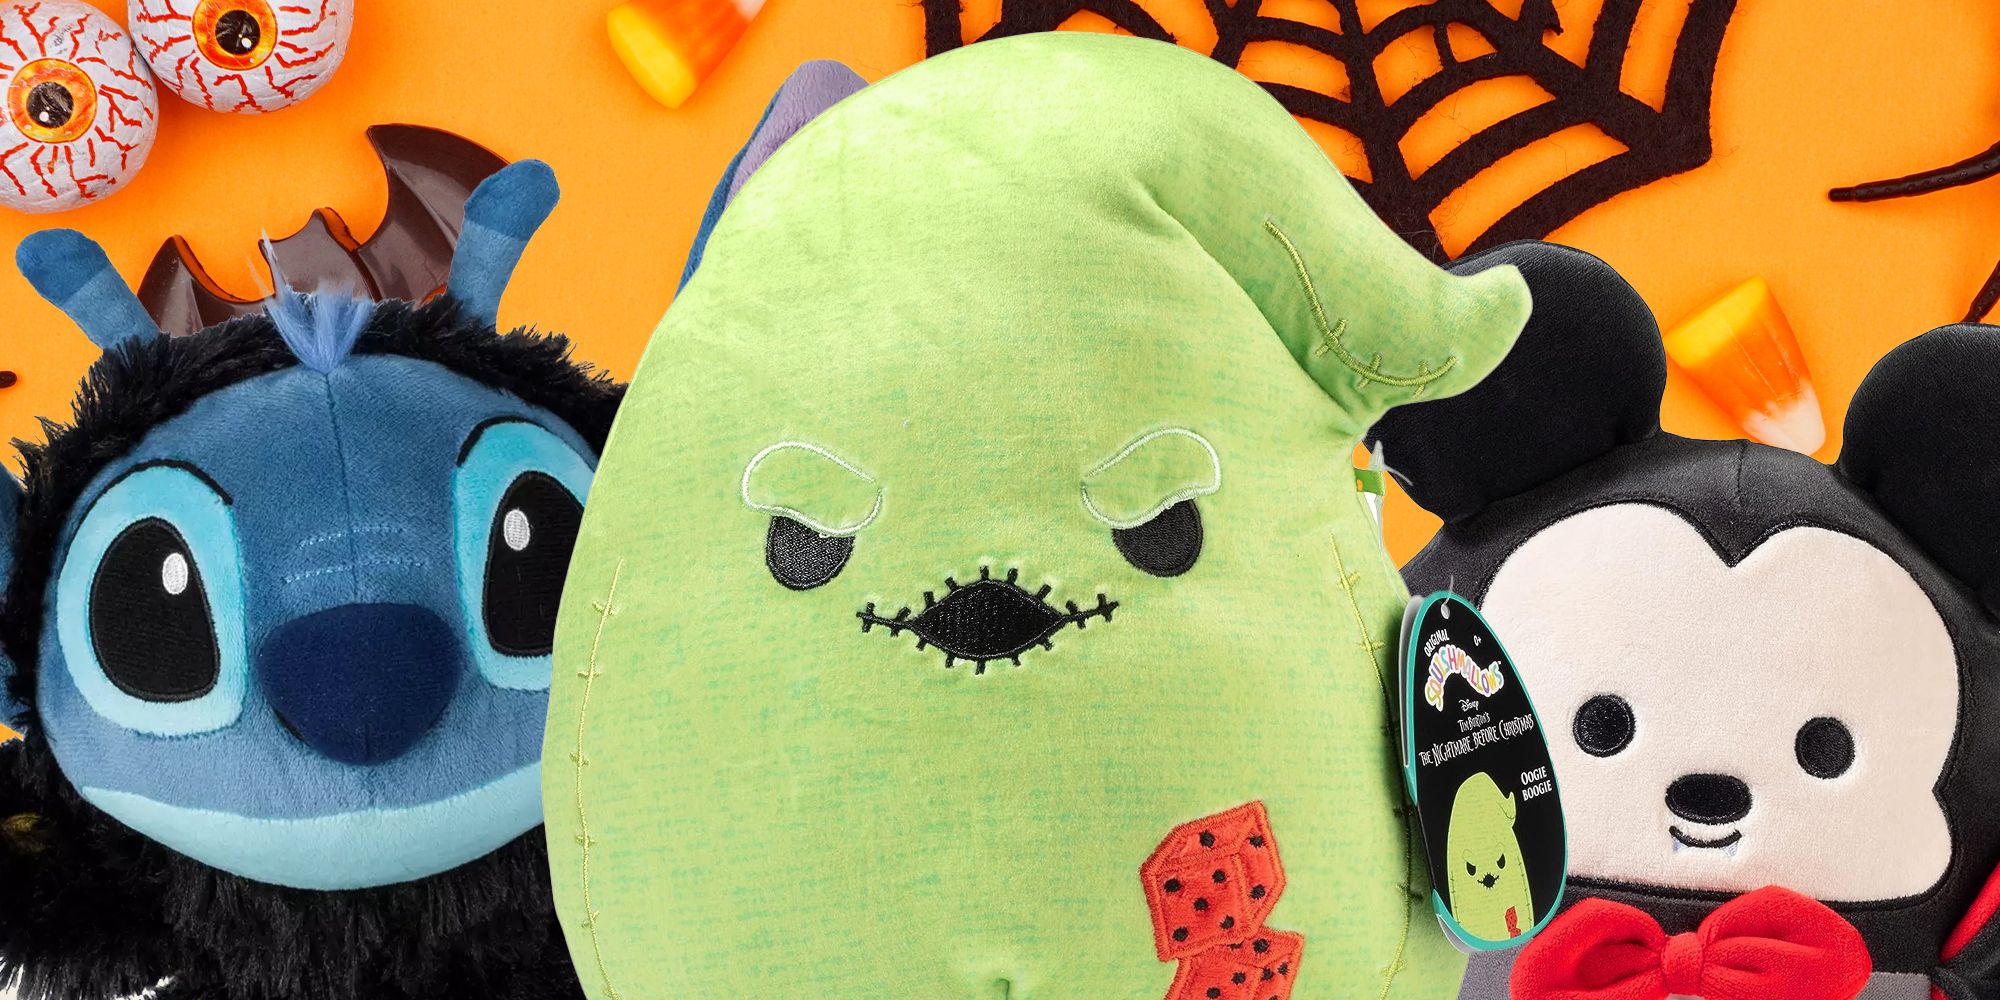 oogie boogie and vampire mickey squishmallows, and a stitch plush